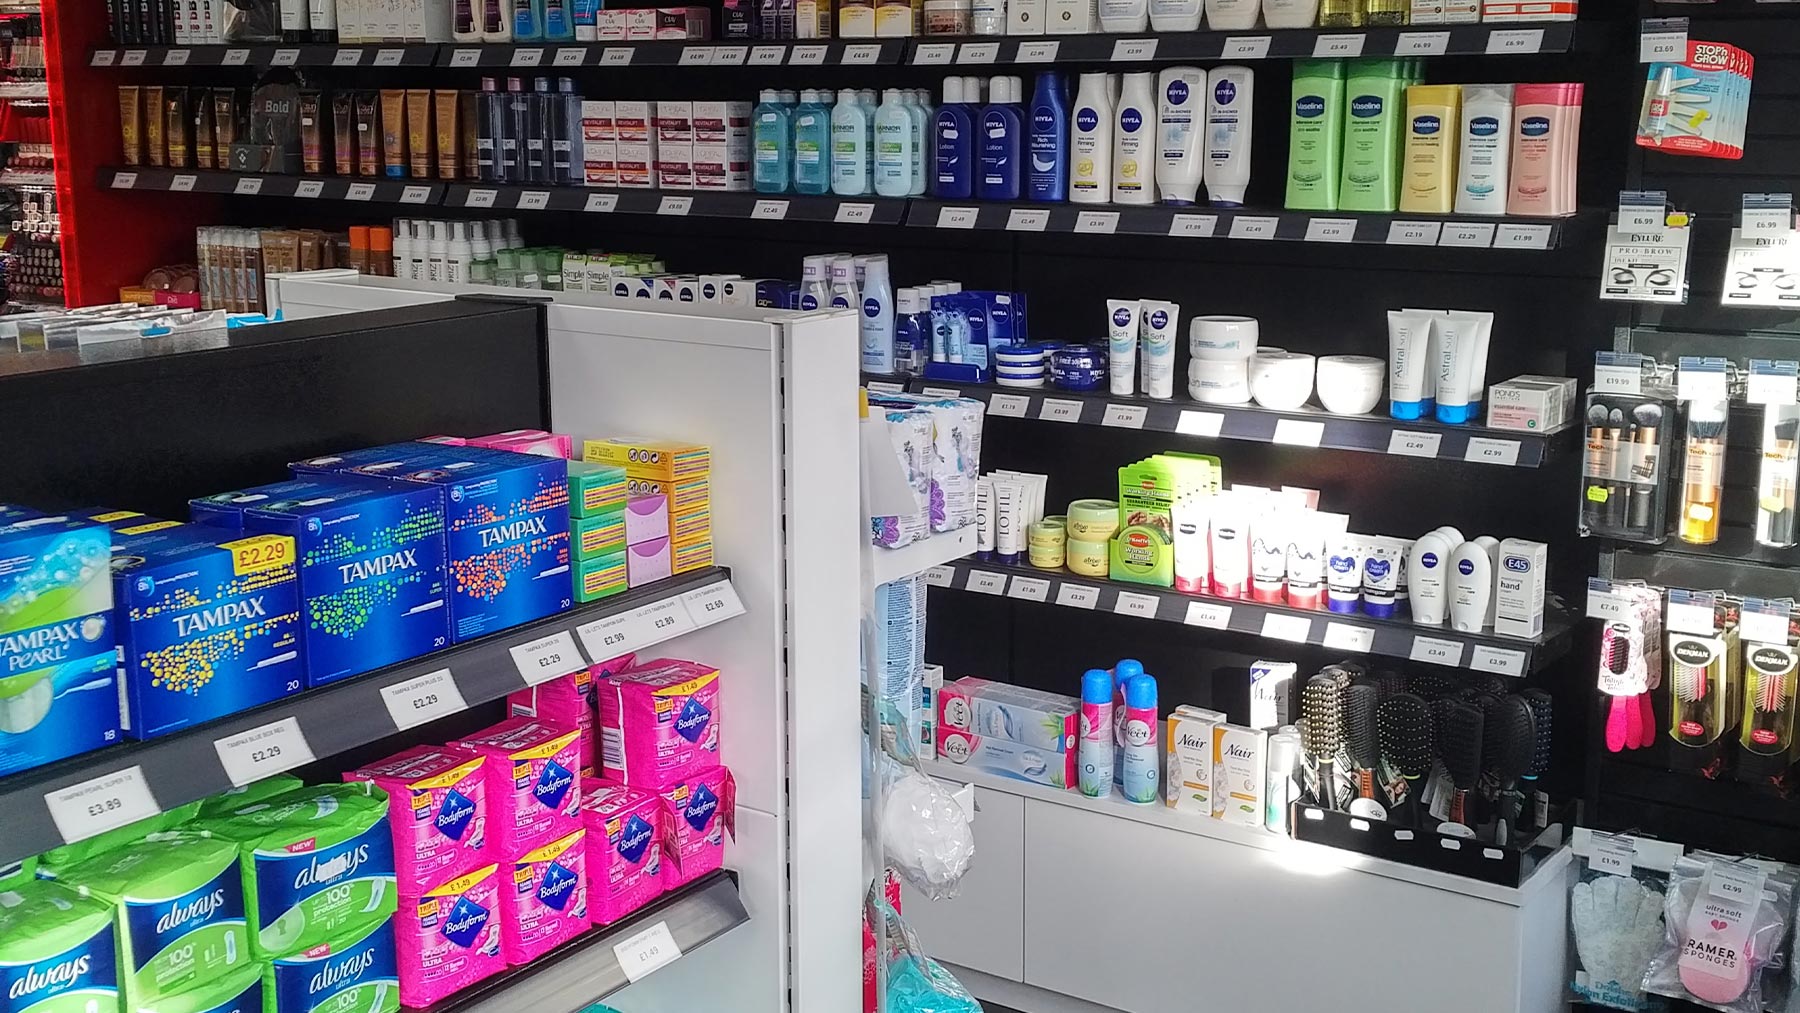 Pharmacy Focused shelving systems